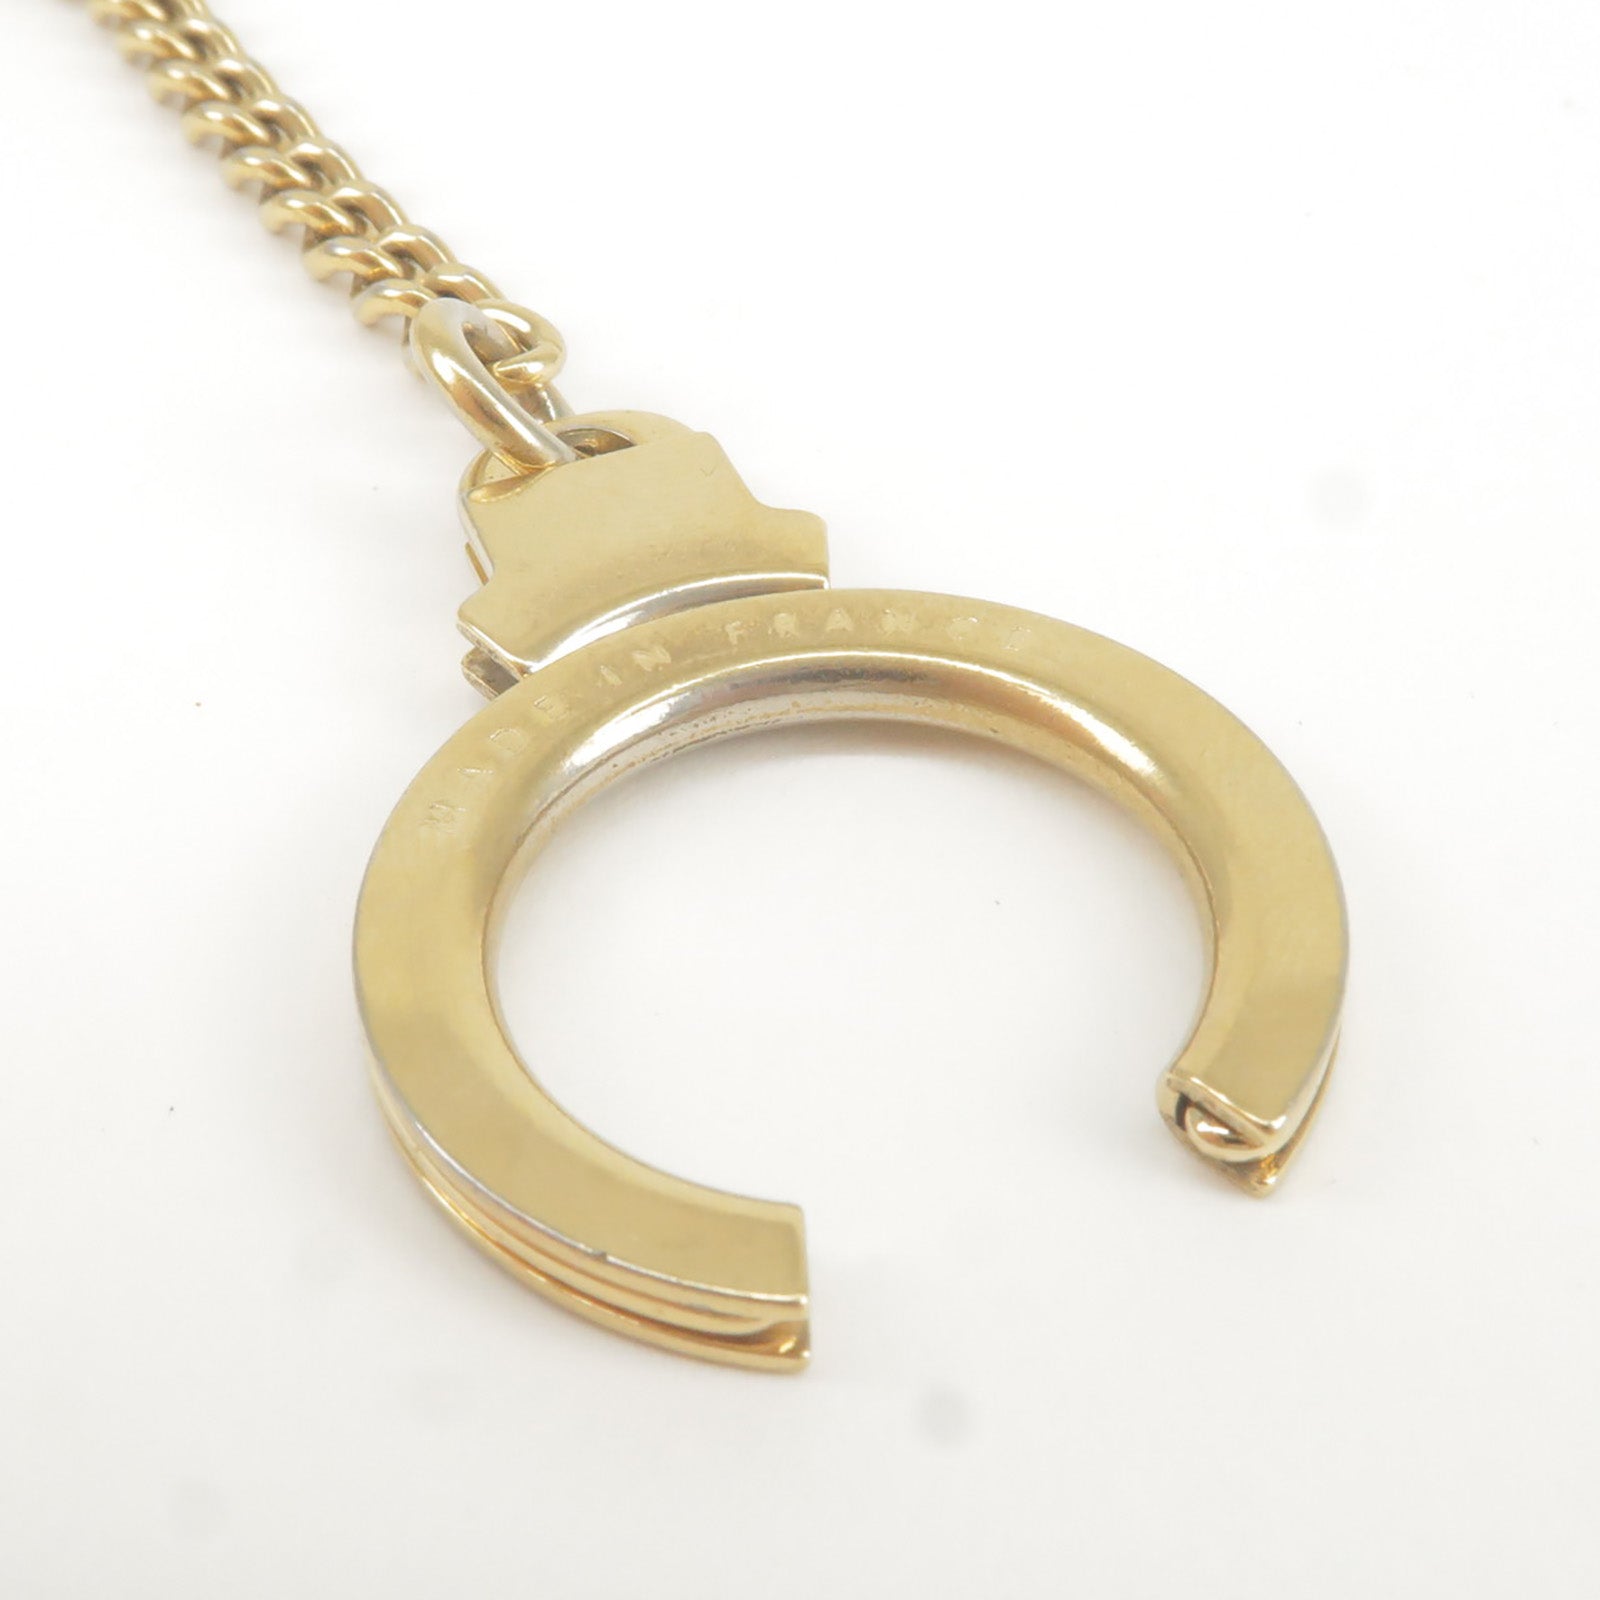 Louis - Chain - Gold - Ano - M58021 – dct - From Louis Vuitton s